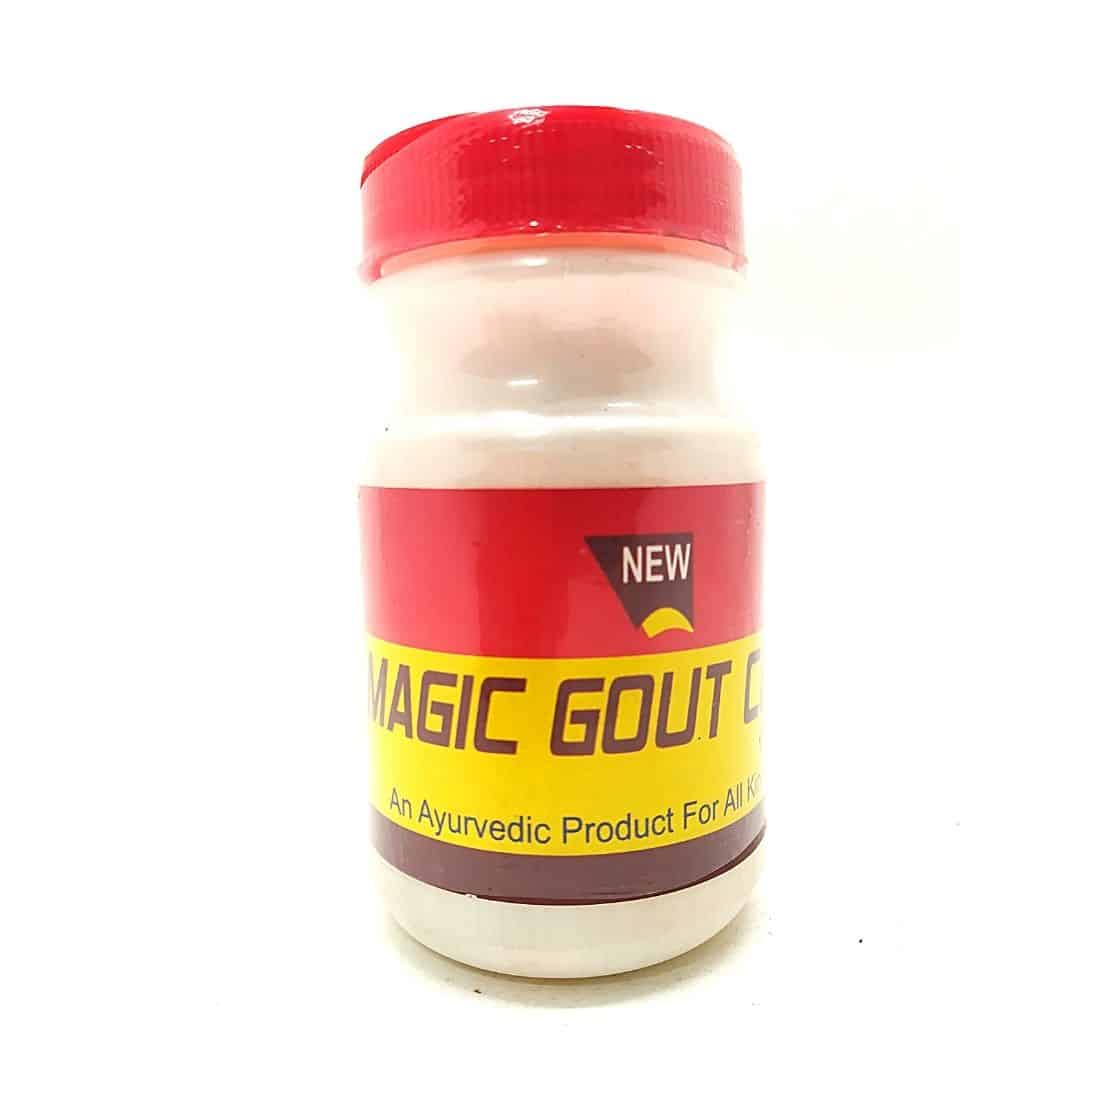 Magic gout cure Tablet helps to decrease inflammation of joints and muscle pain by boosting blood